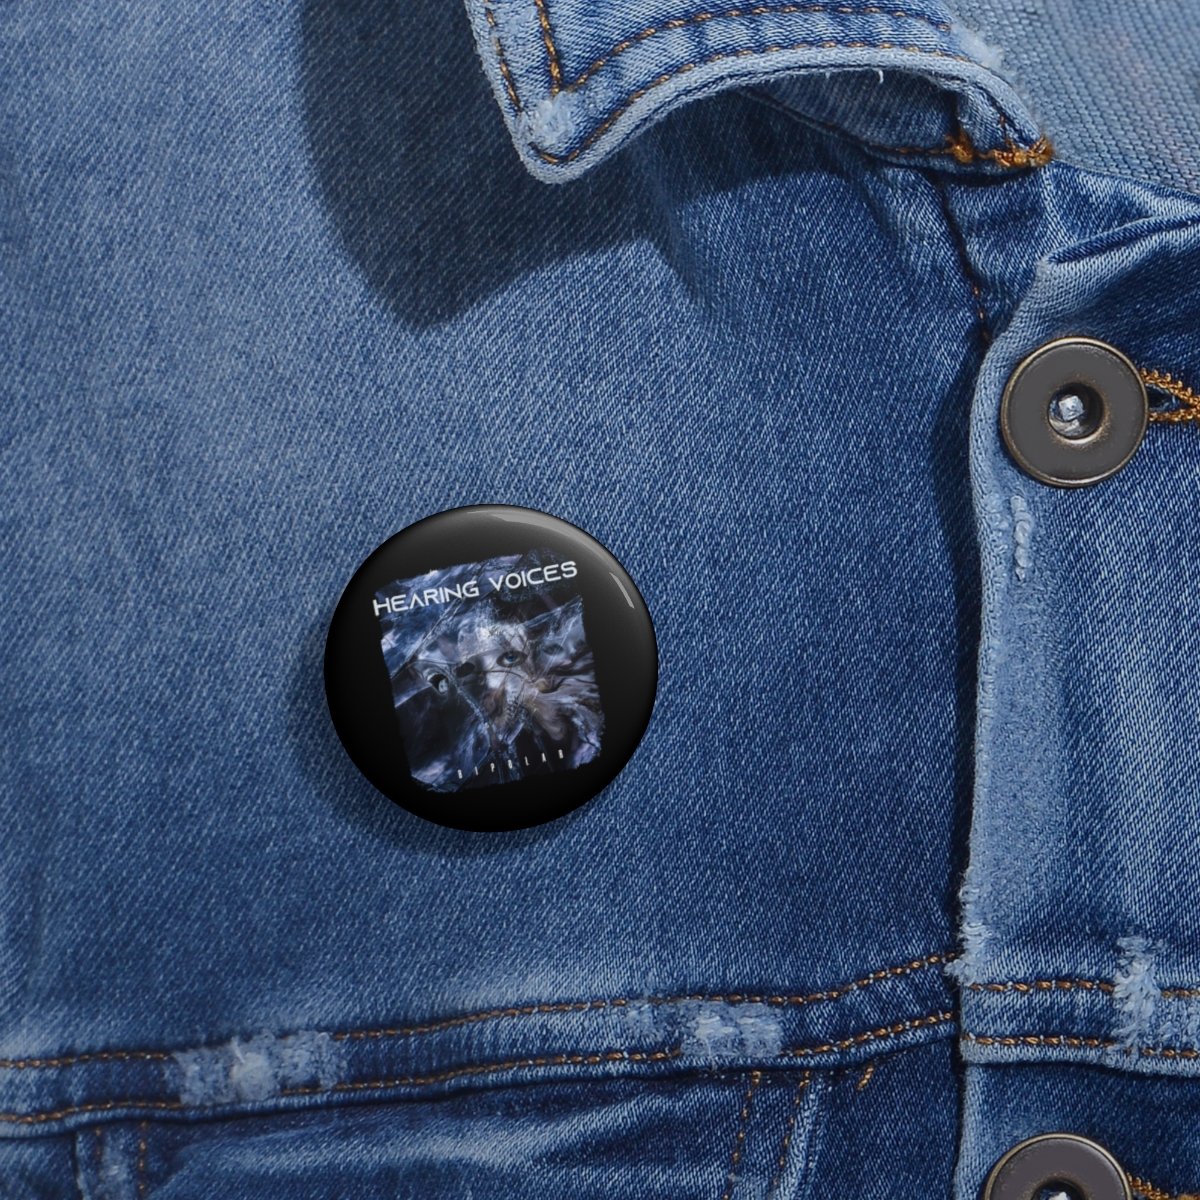 Hearing Voices – Bipolar Pin Buttons